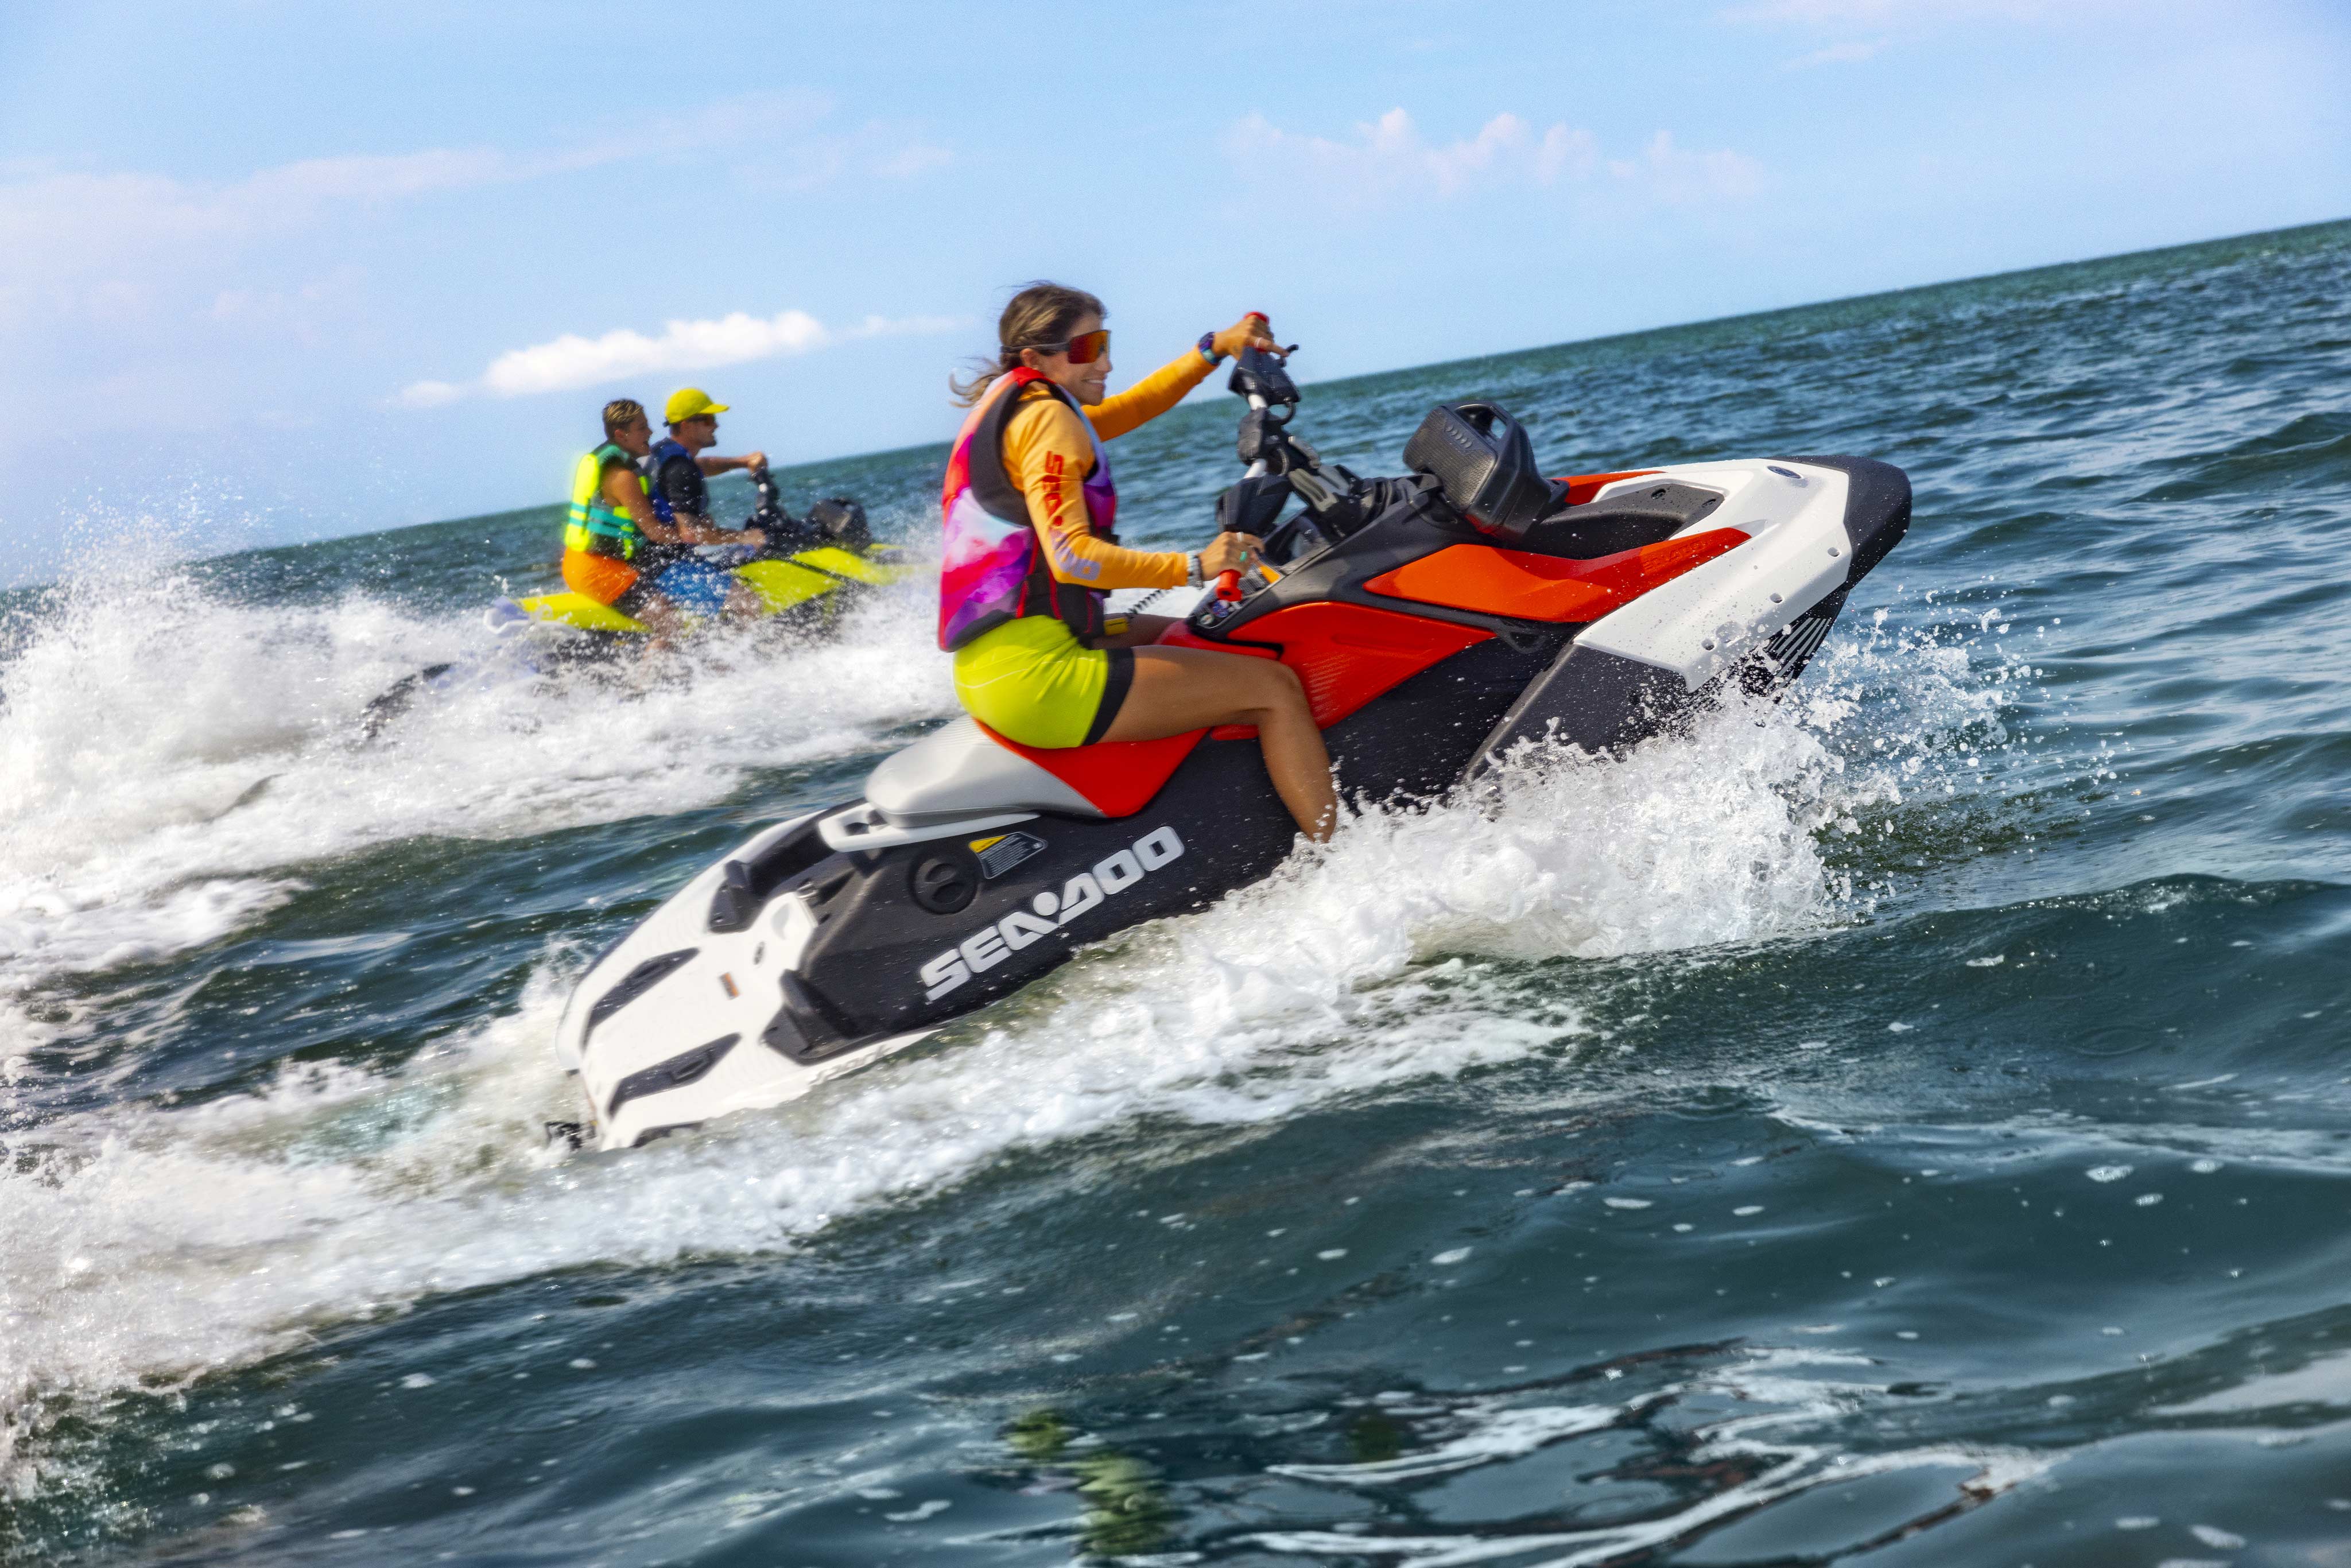 Two Sea-Doo Spark personal watercraft riding on water